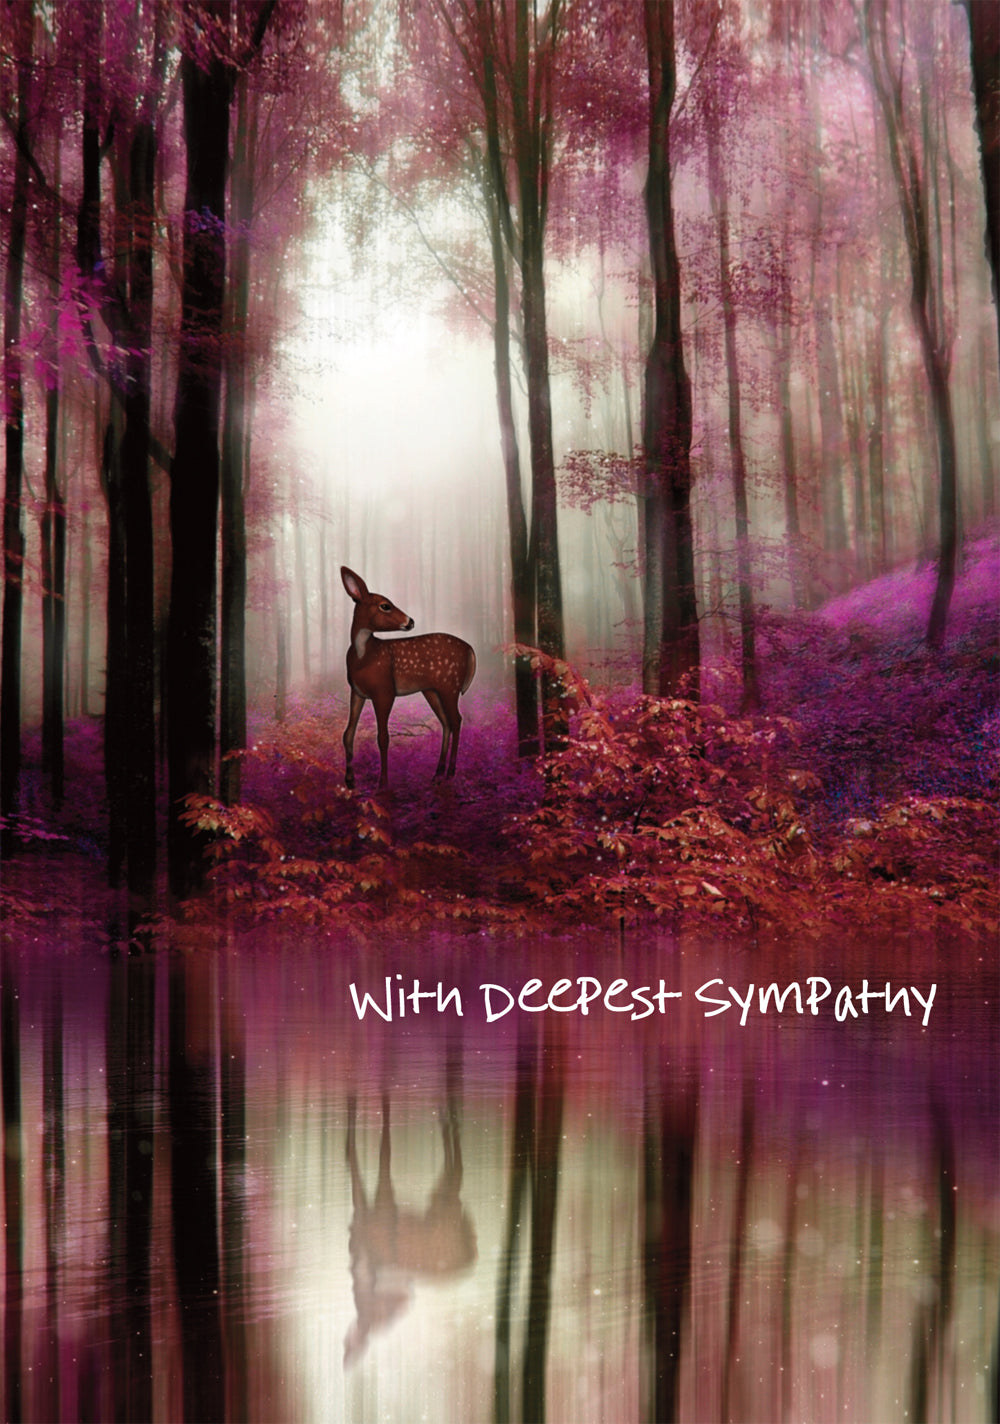 With Deepest Sympathy - DeerWith Deepest Sympathy - Deer